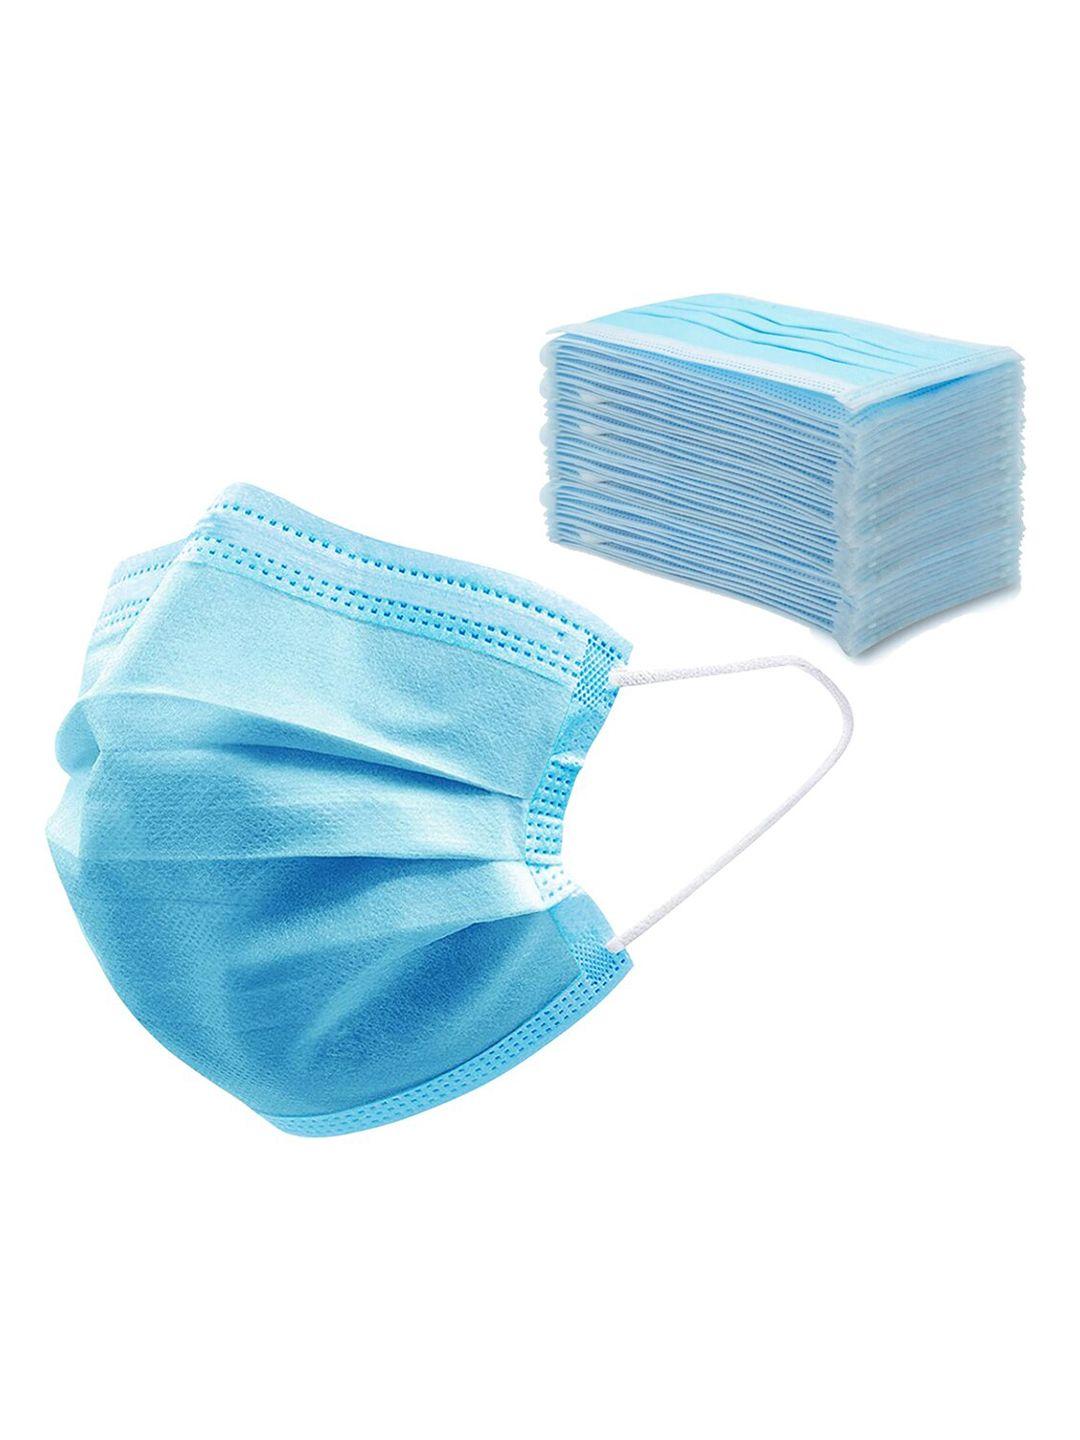 Story@home Pack Of 50 3-Ply Single-Use Disposable Outdoor Masks